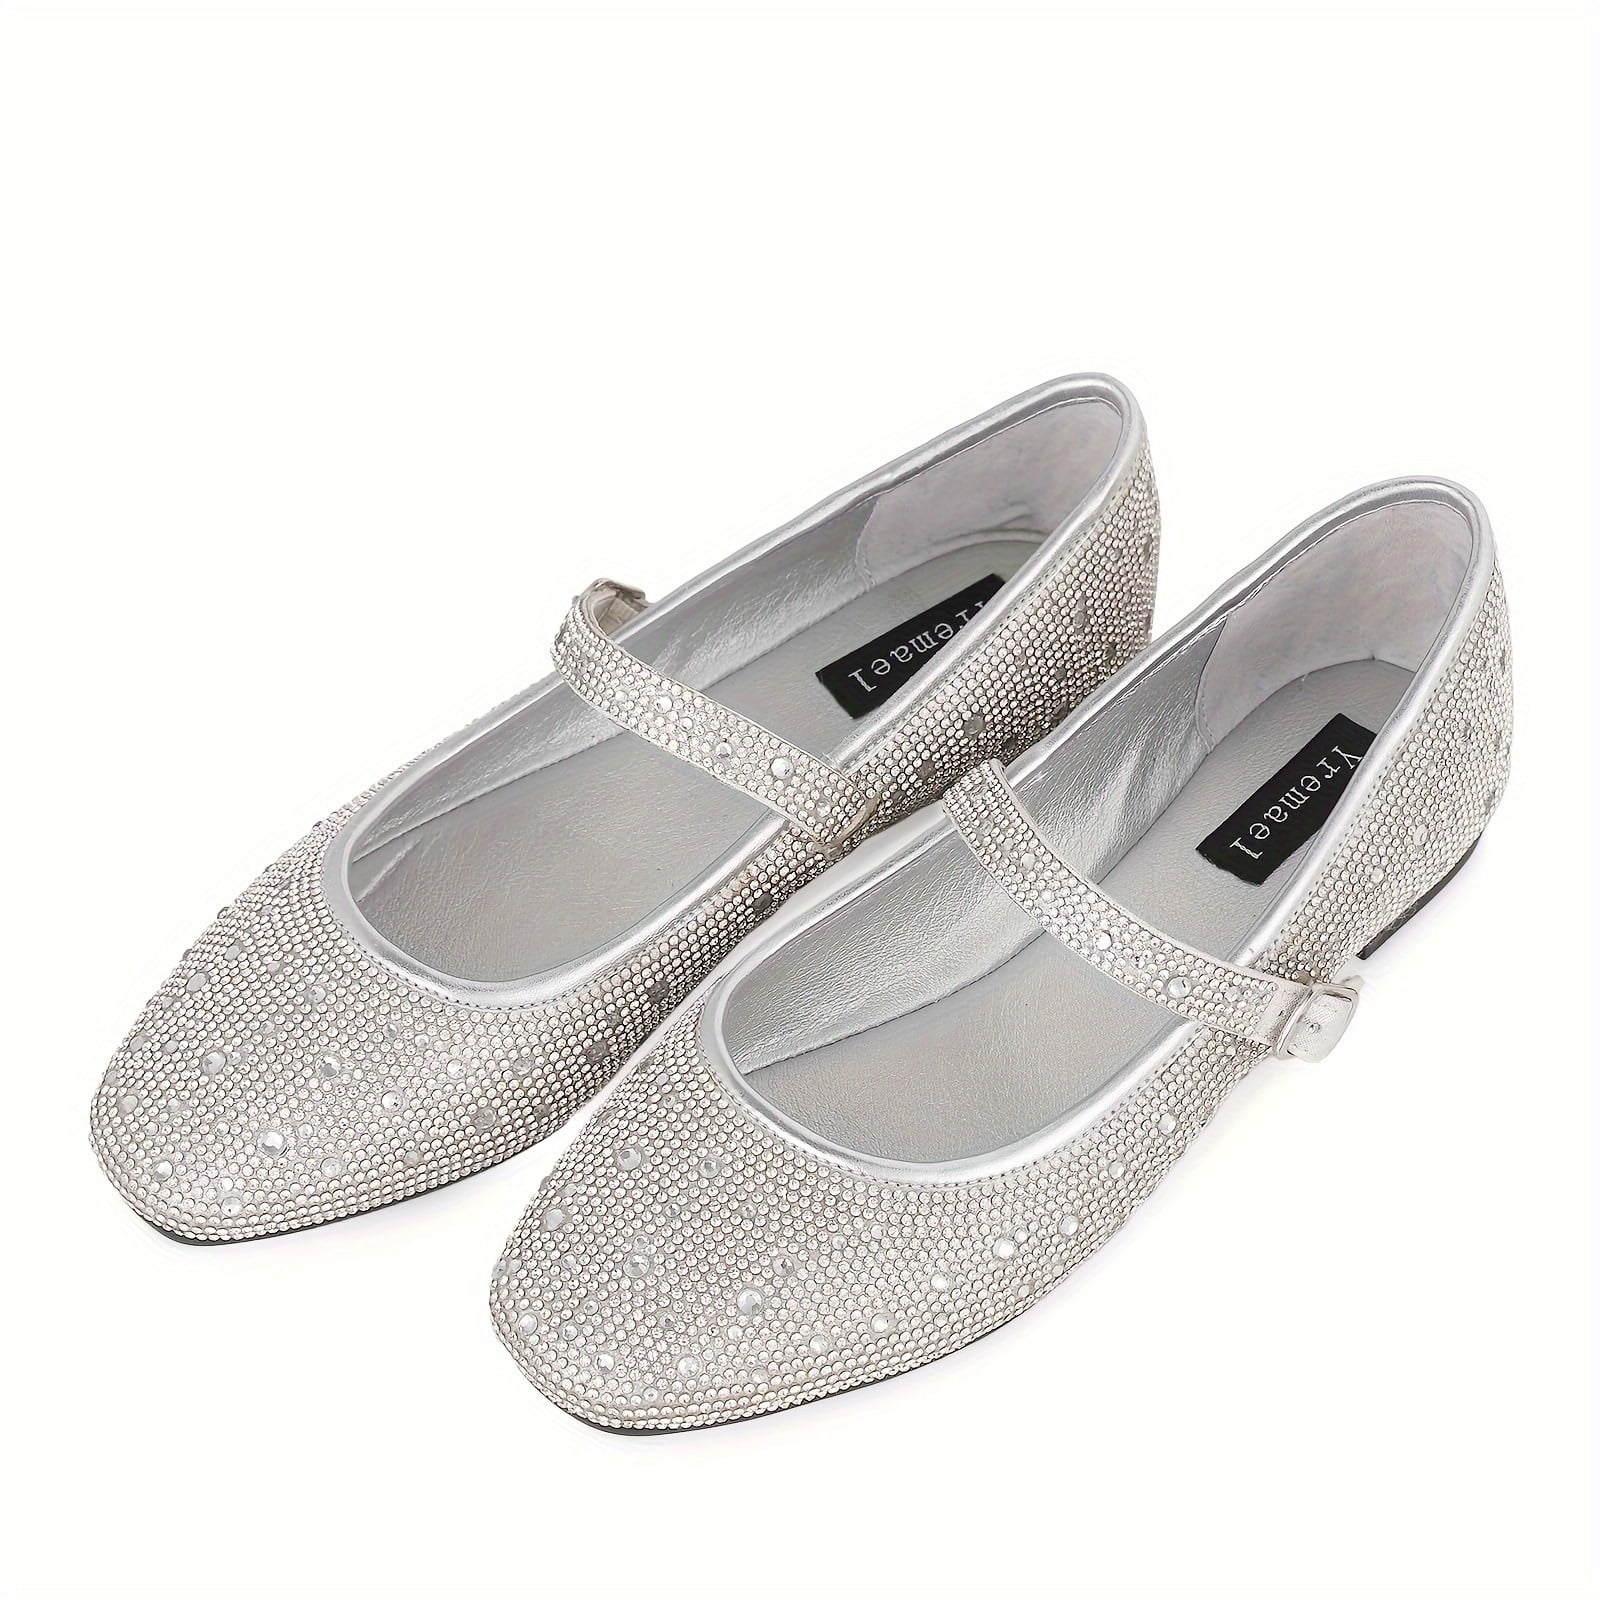 KINODAY Ballet Shoes Buckle Strap Wedding Pumps Round Toe Slip On ...